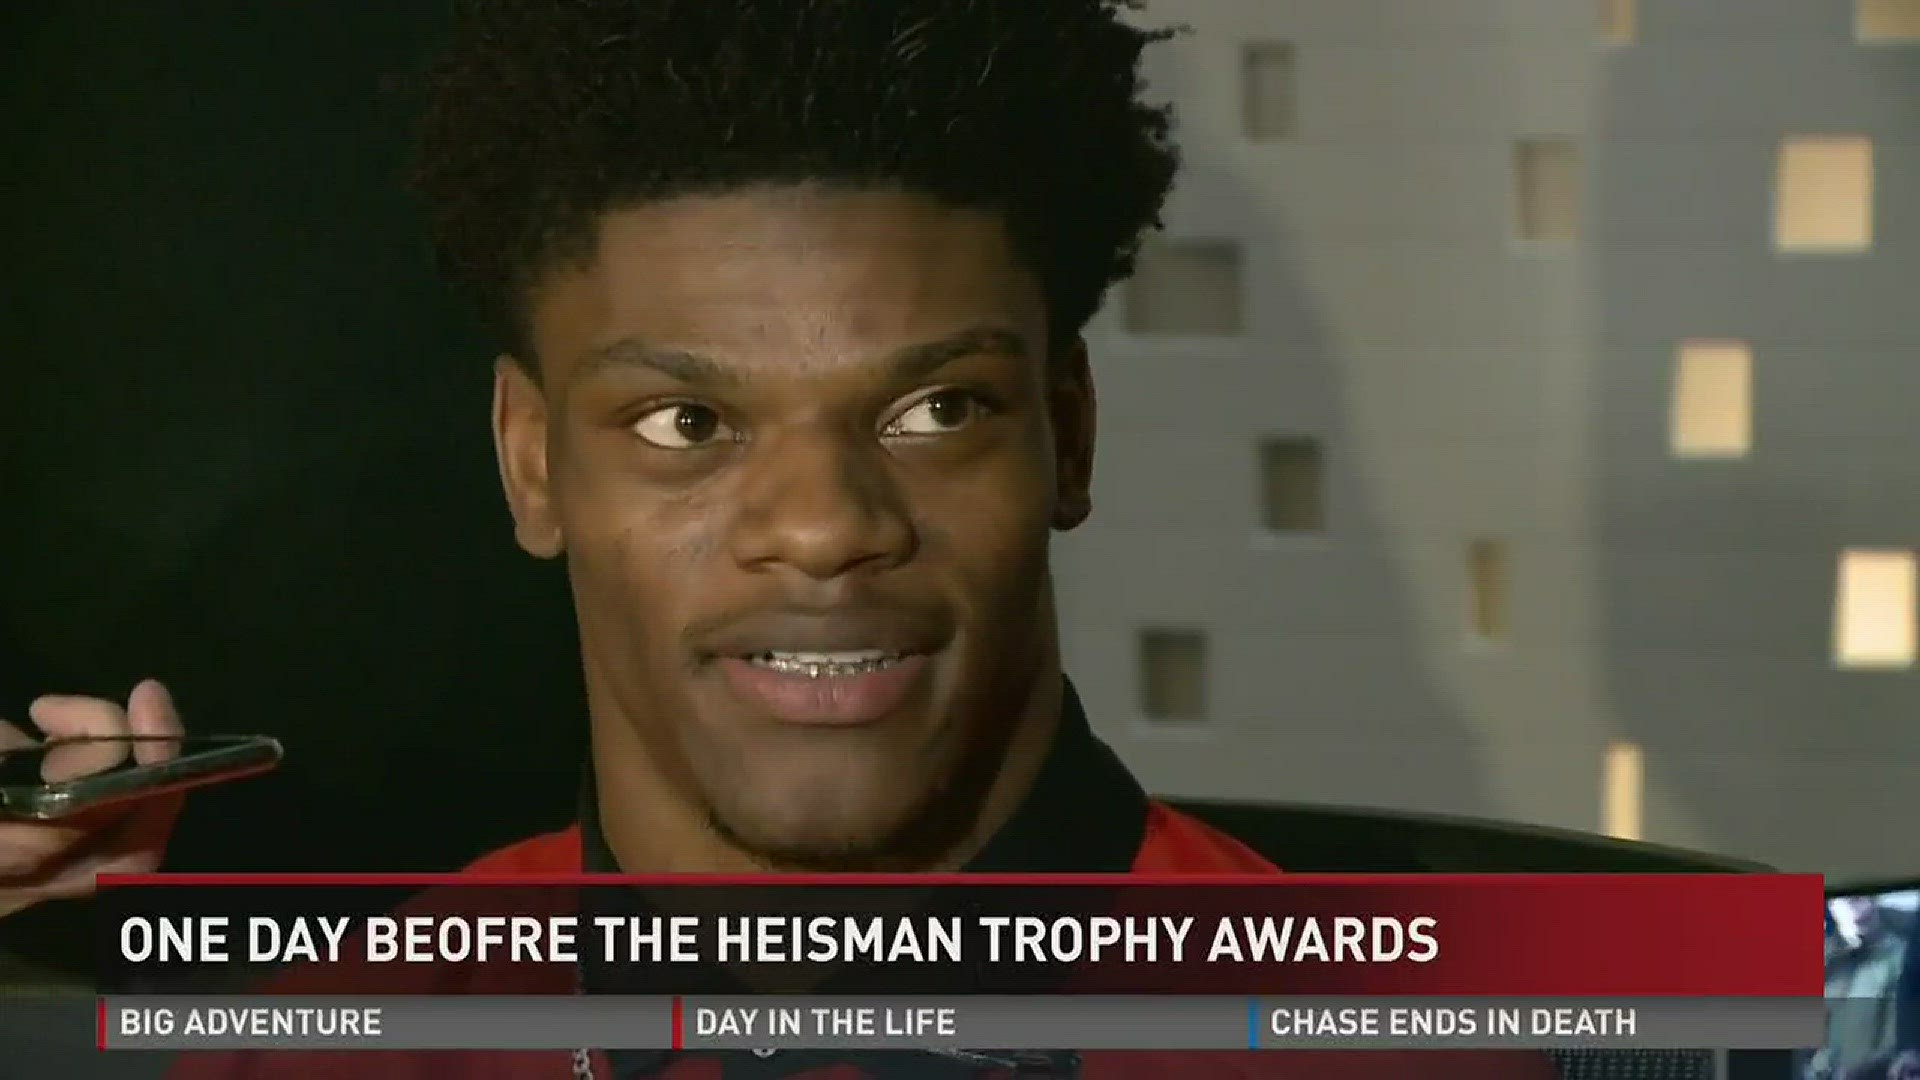 One day before the Heisman Trophy awards